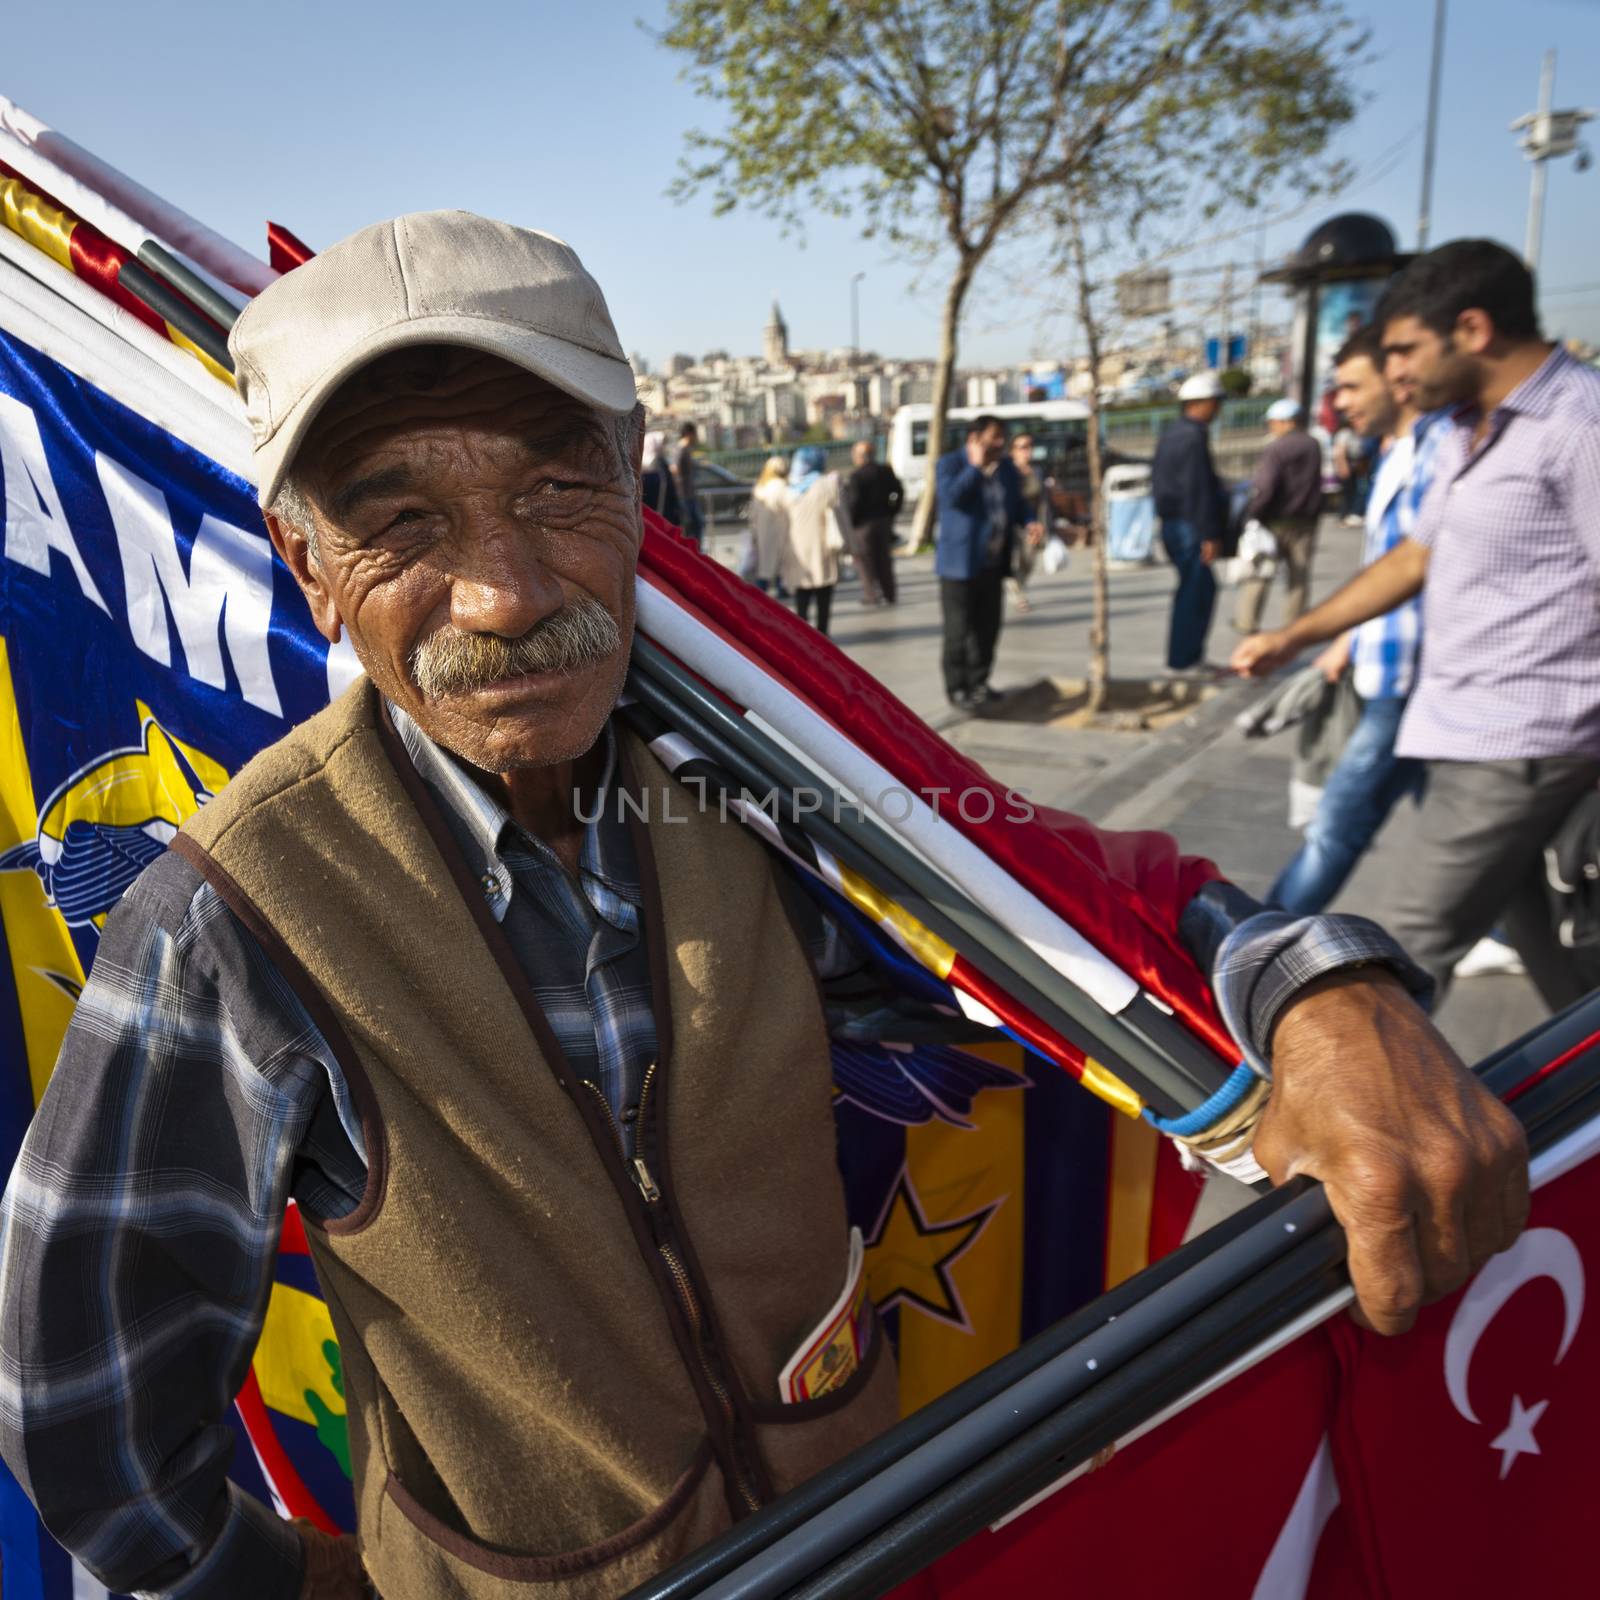 ISTANBUL, TURKEY – APRIL 25: Unidenified street vendor selling Turkish flags near the Istanbul Spice Market prior to Anzac Day on April 25, 2012 in Istanbul, Turkey. 